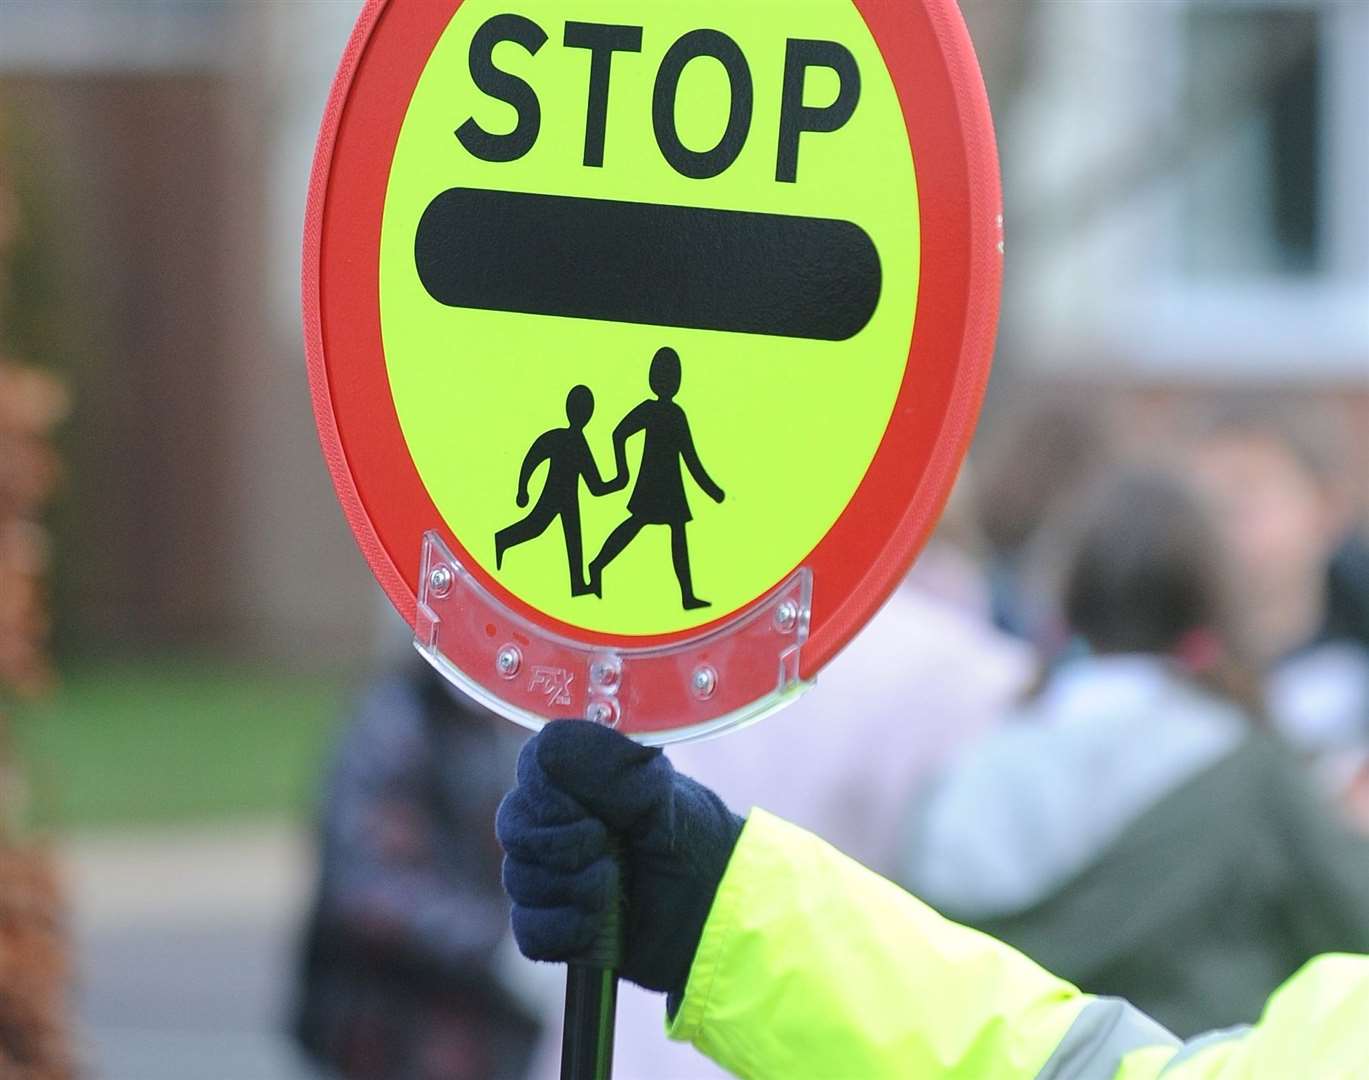 Lollipop people are causing more problems than they solve, writes our columnist